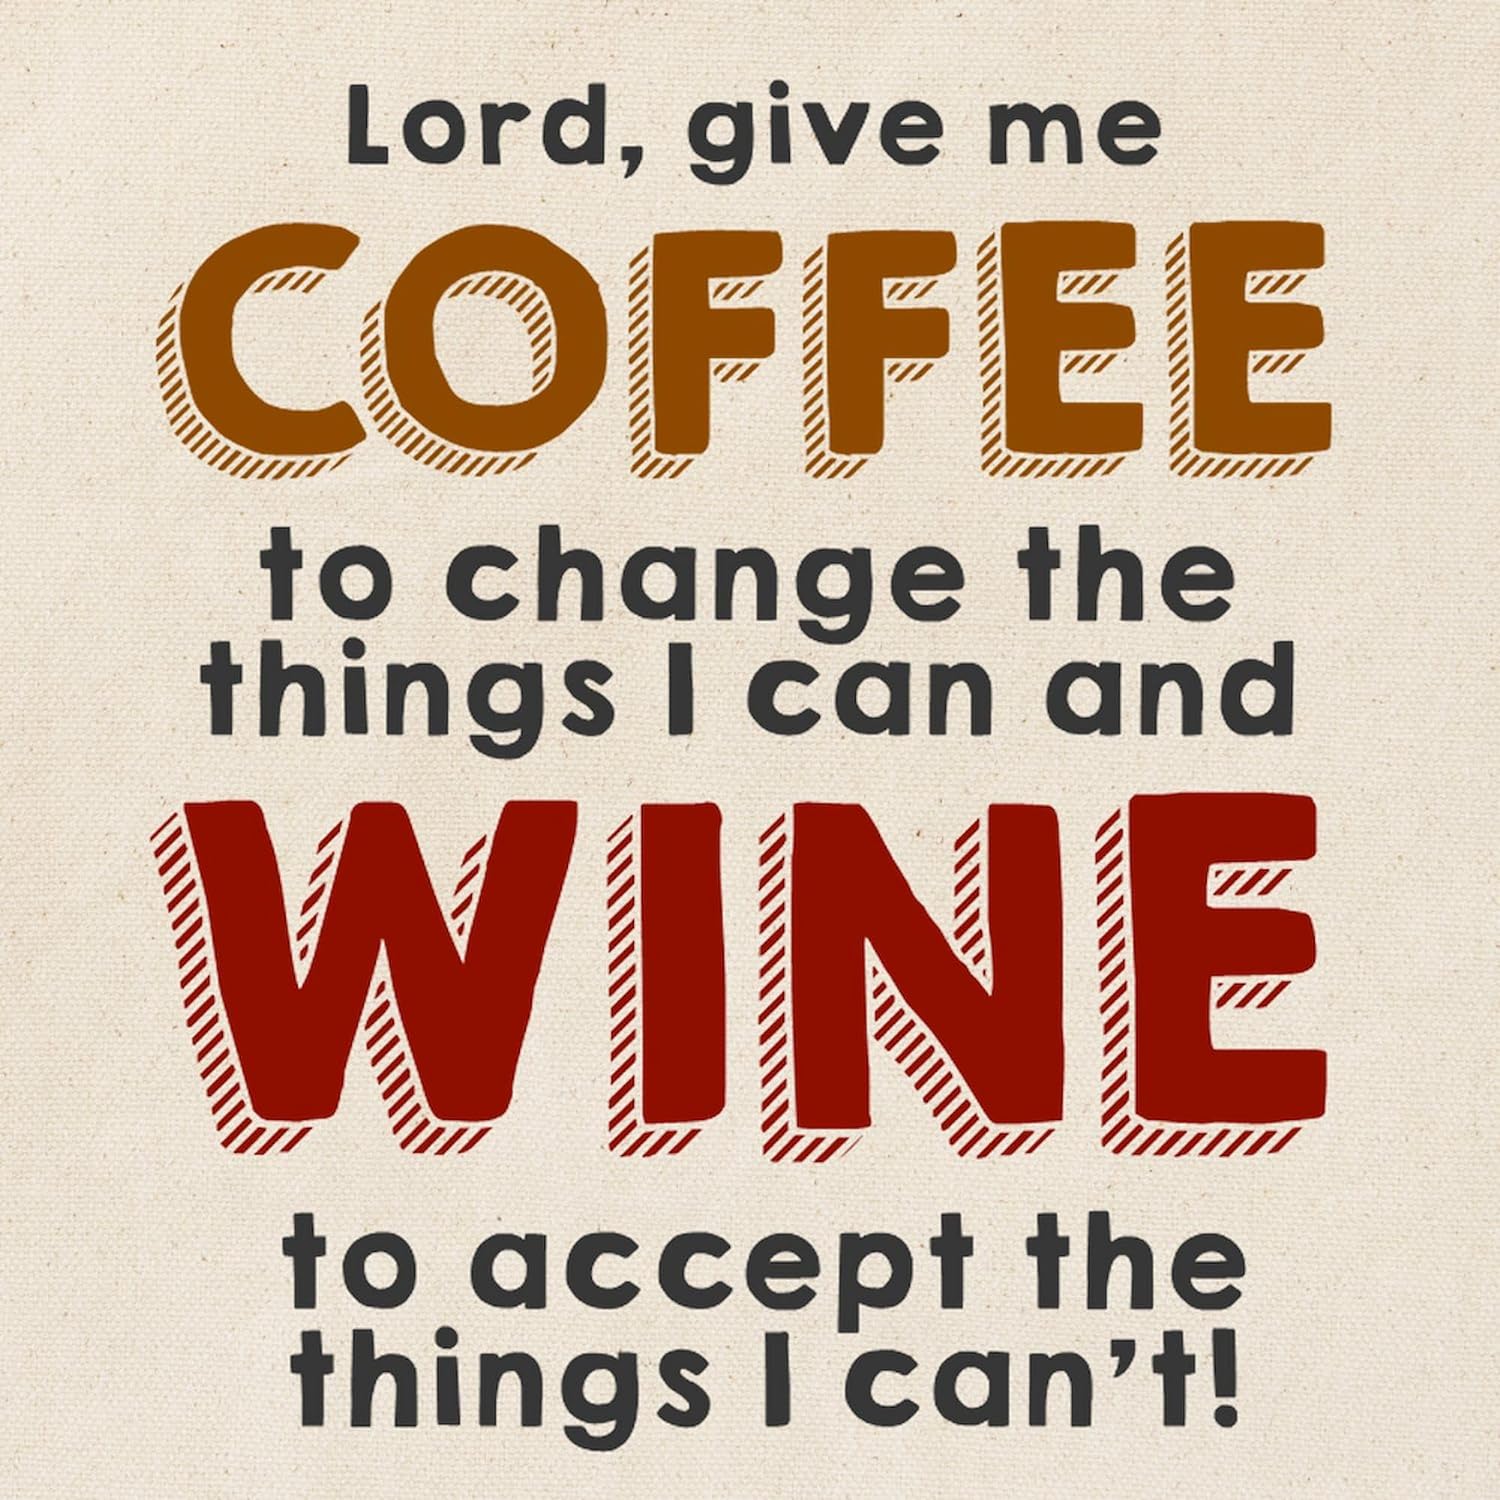 Lord Give Me Coffee To Change Wine To Accept Christian Tote Bag claimedbygoddesigns